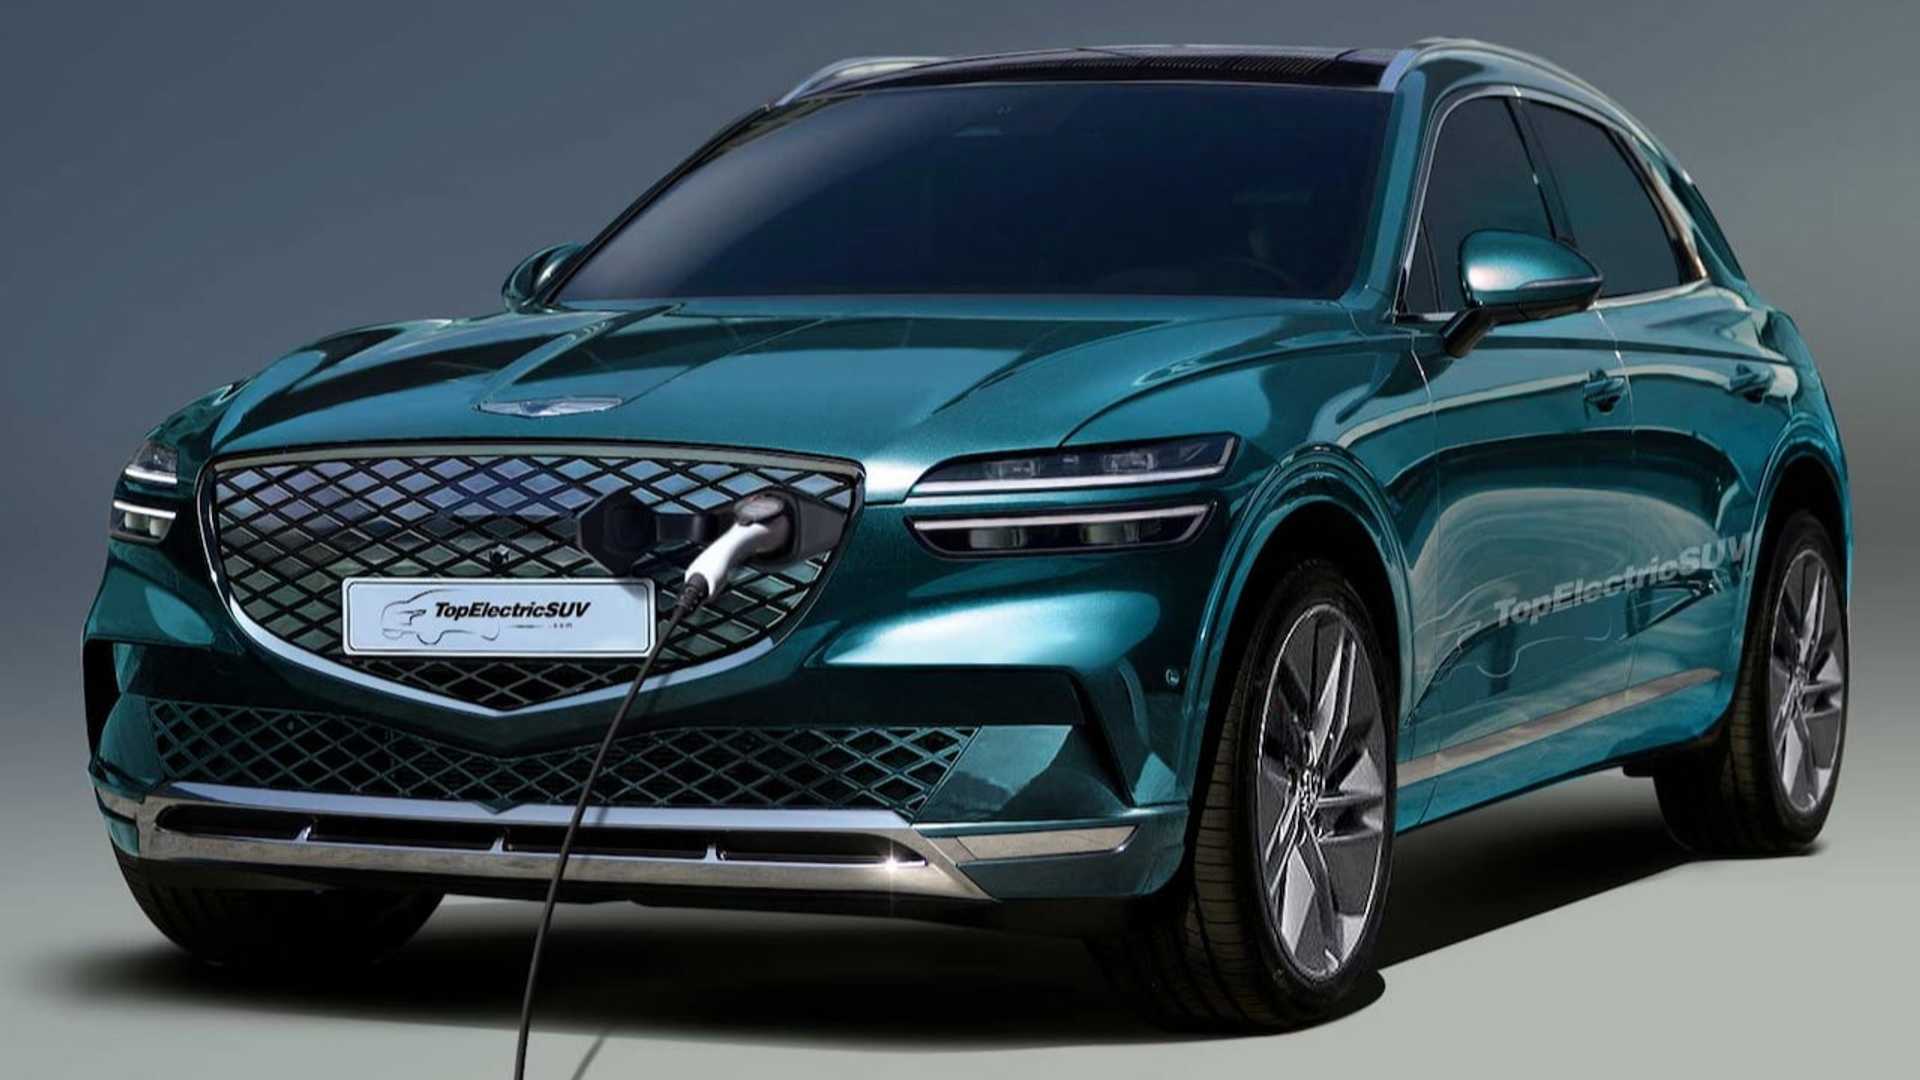 Hyundai's Genesis to launch electric version of its GV70 SUV in China